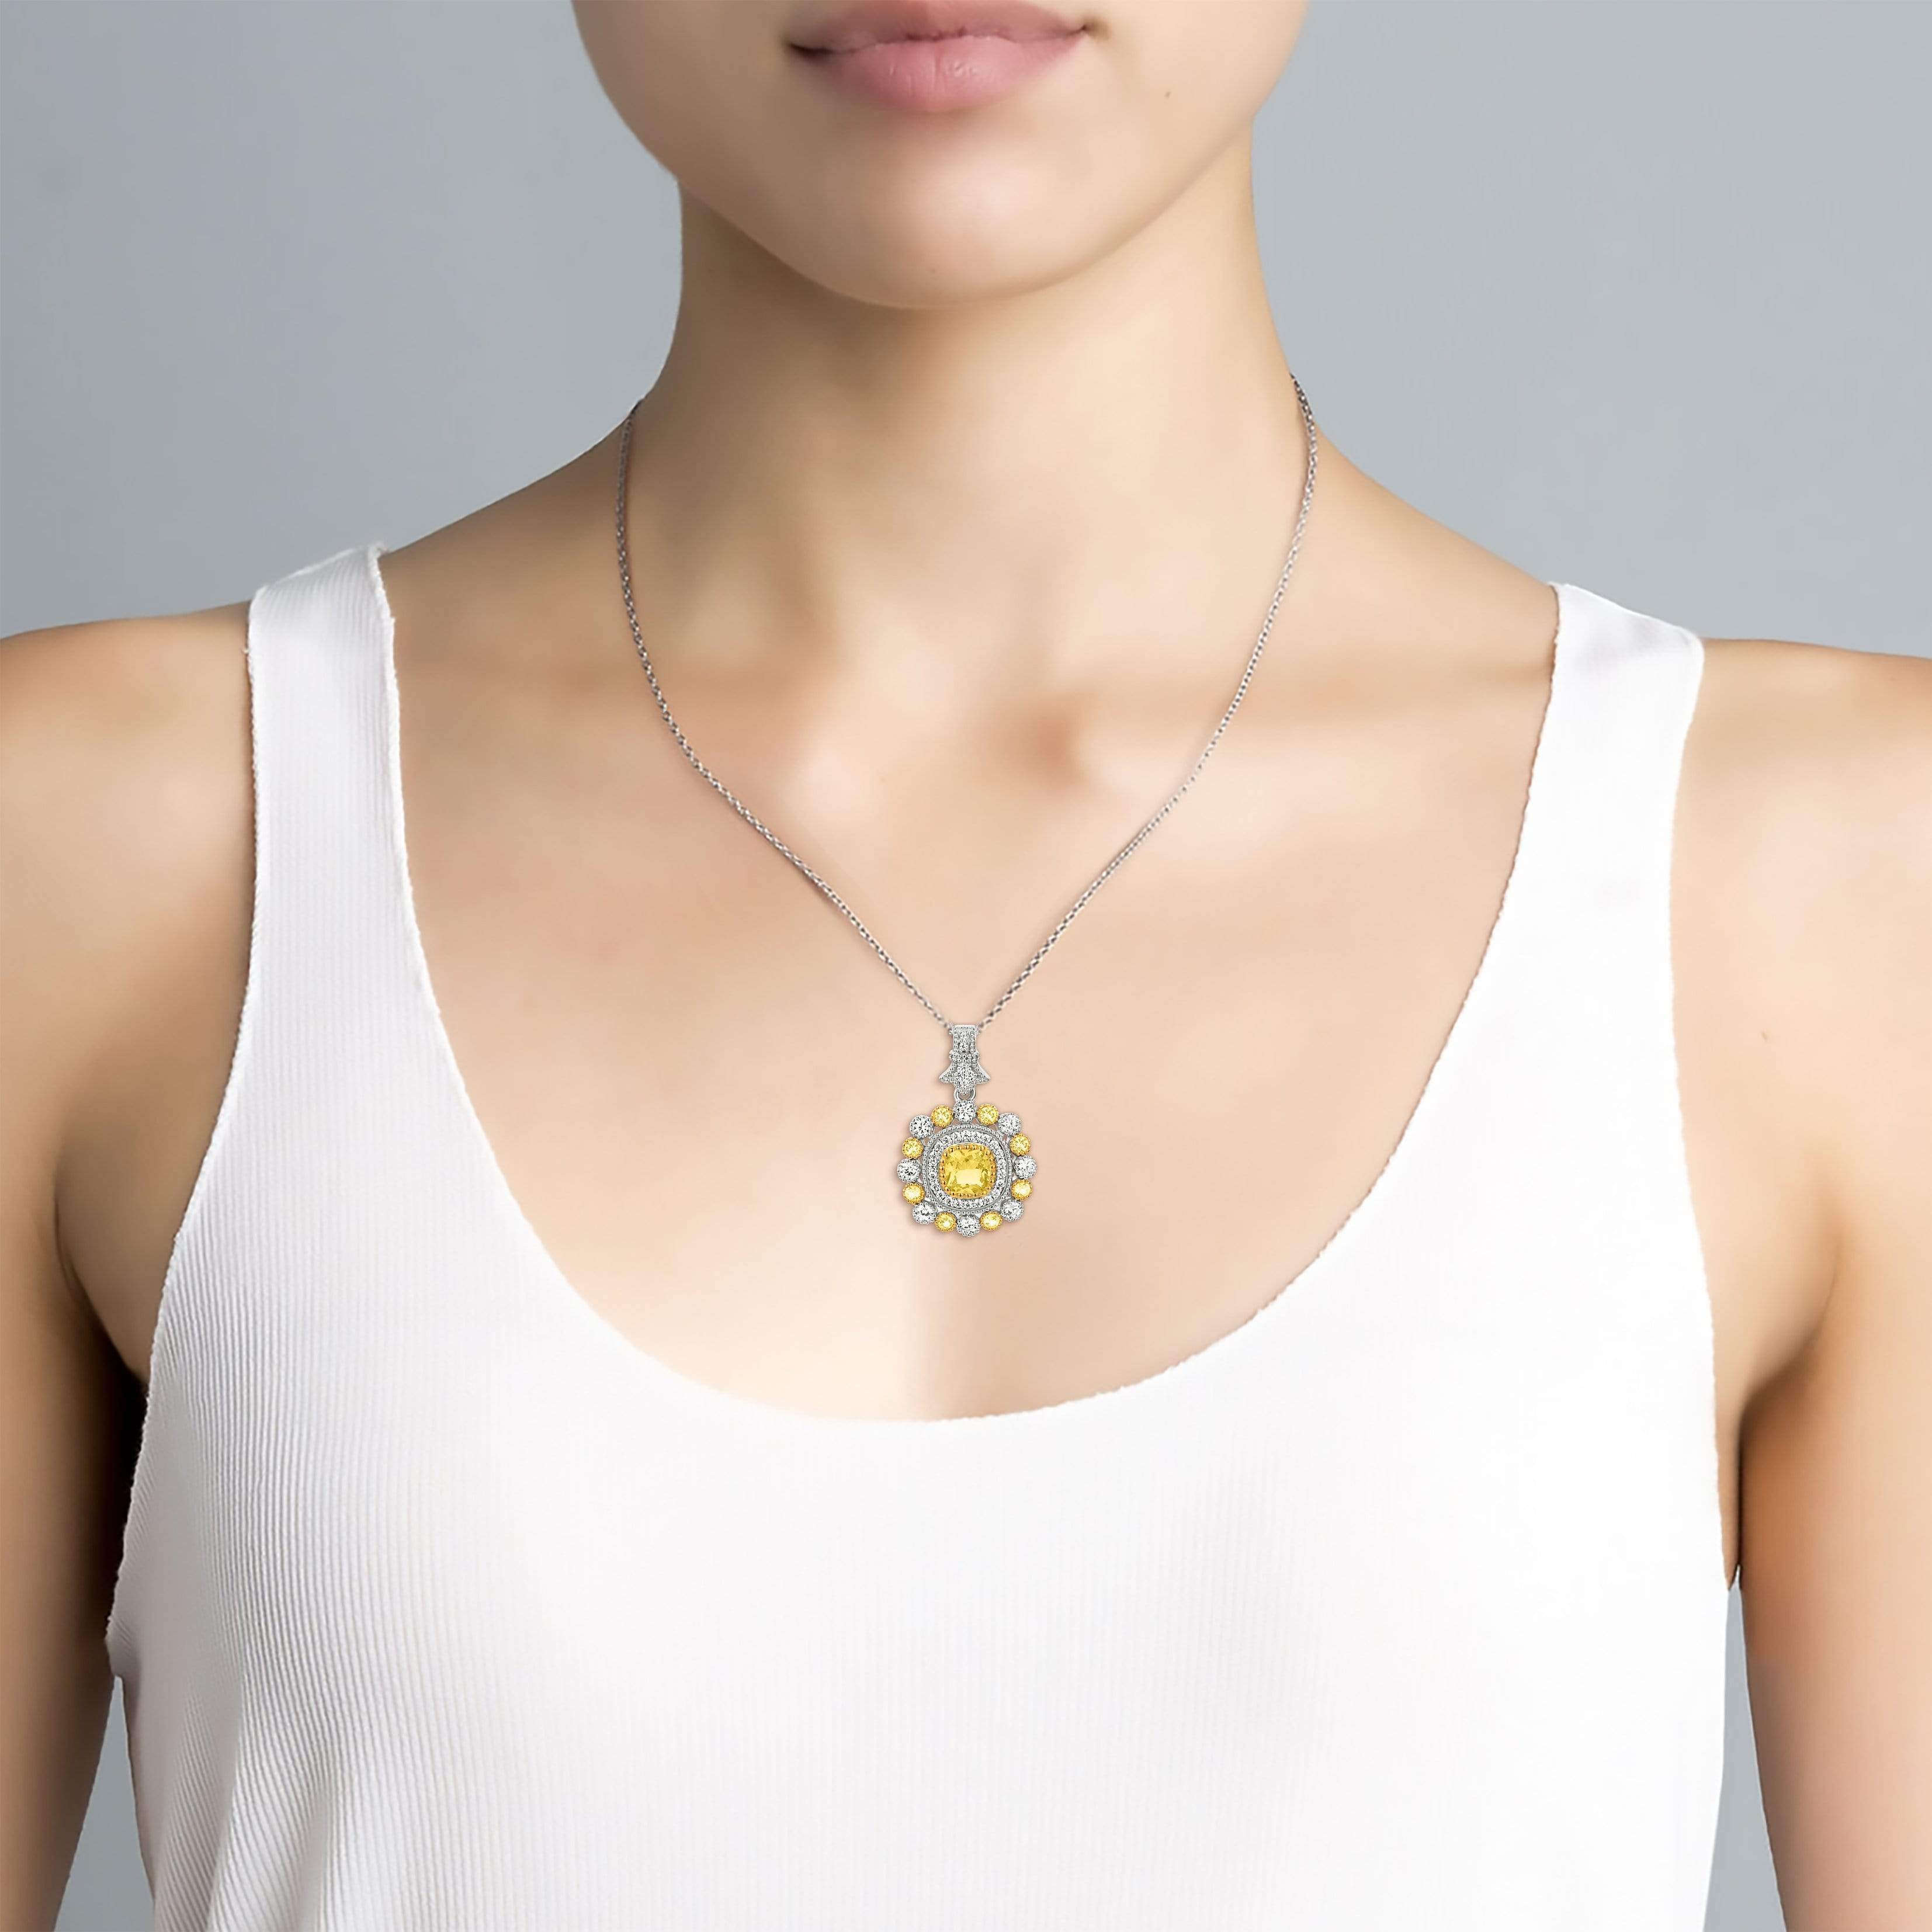 Lynora Jewellery Necklace 18" / Sterling Silver / Citrine Giallo Cushion Necklace Sterling Silver